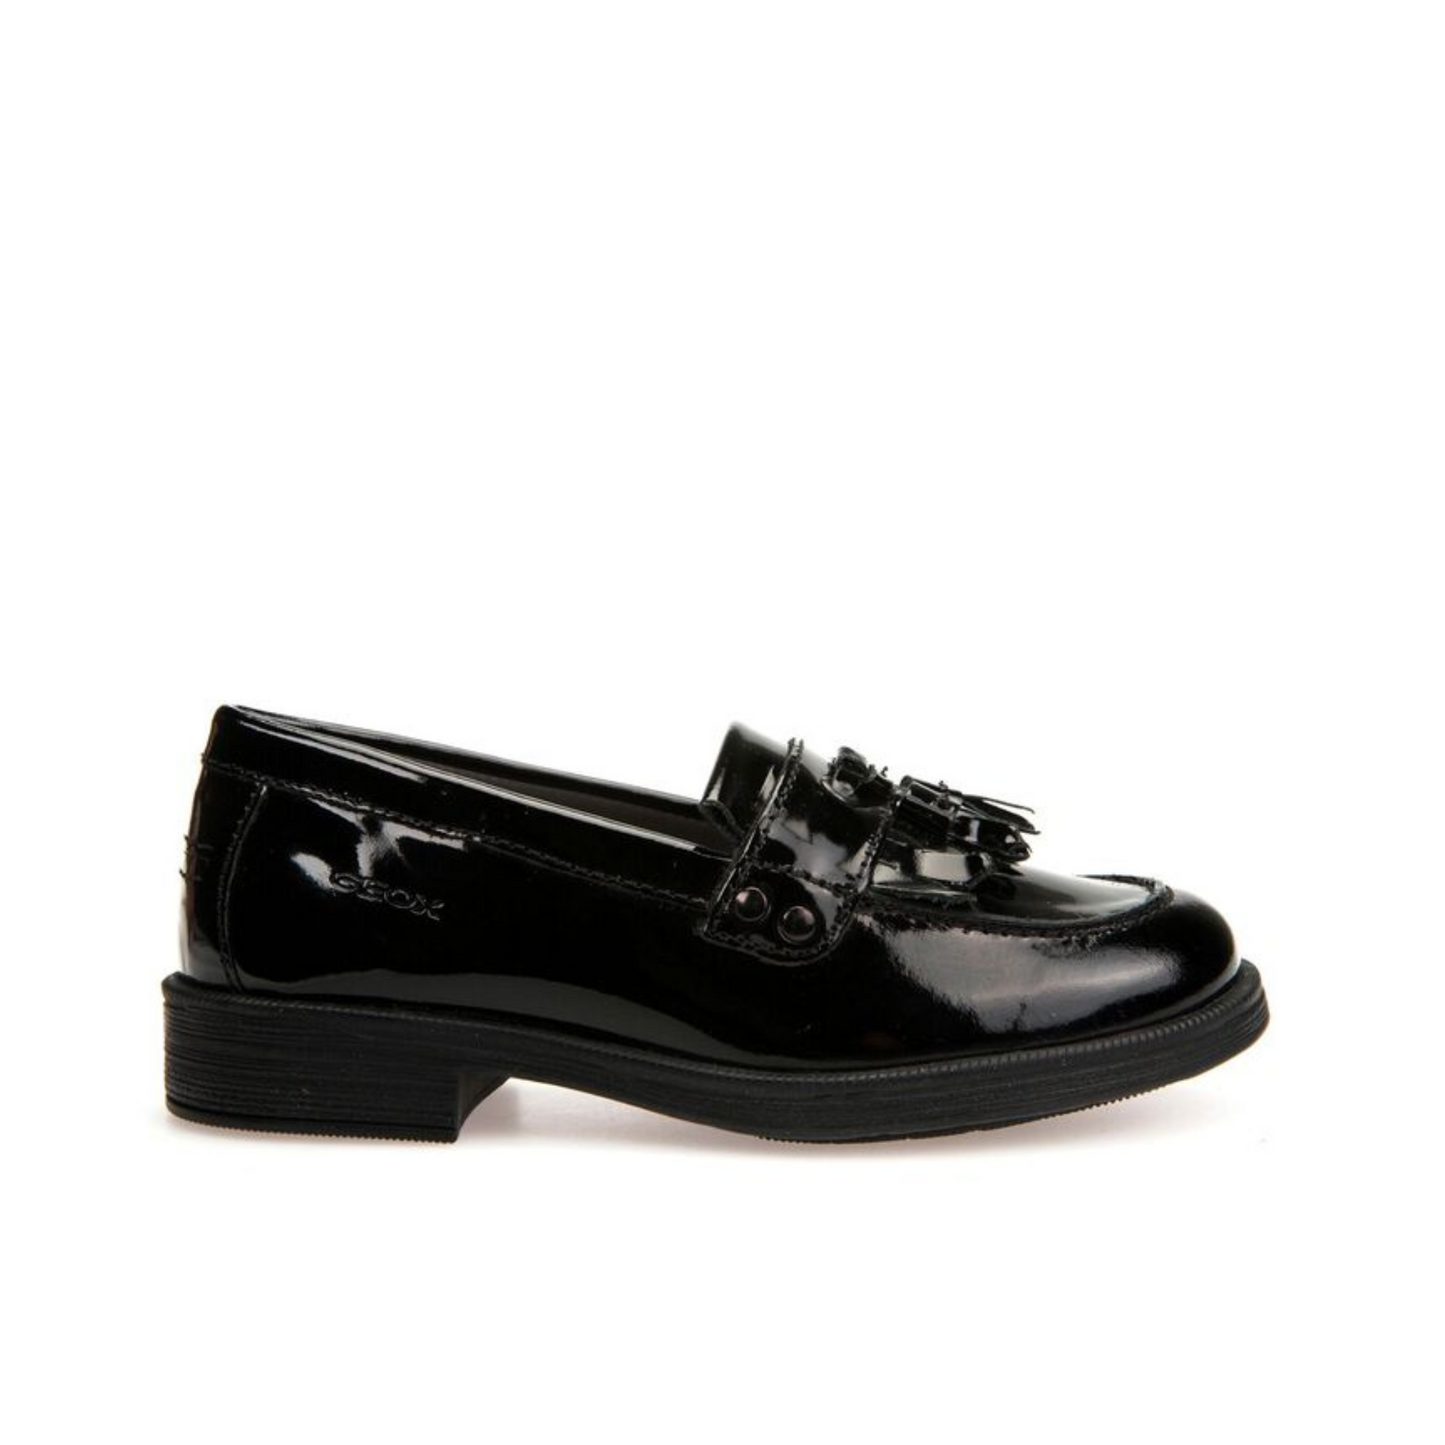 Agata Loafer With Tassel Black Patent Leather Girls School Shoe